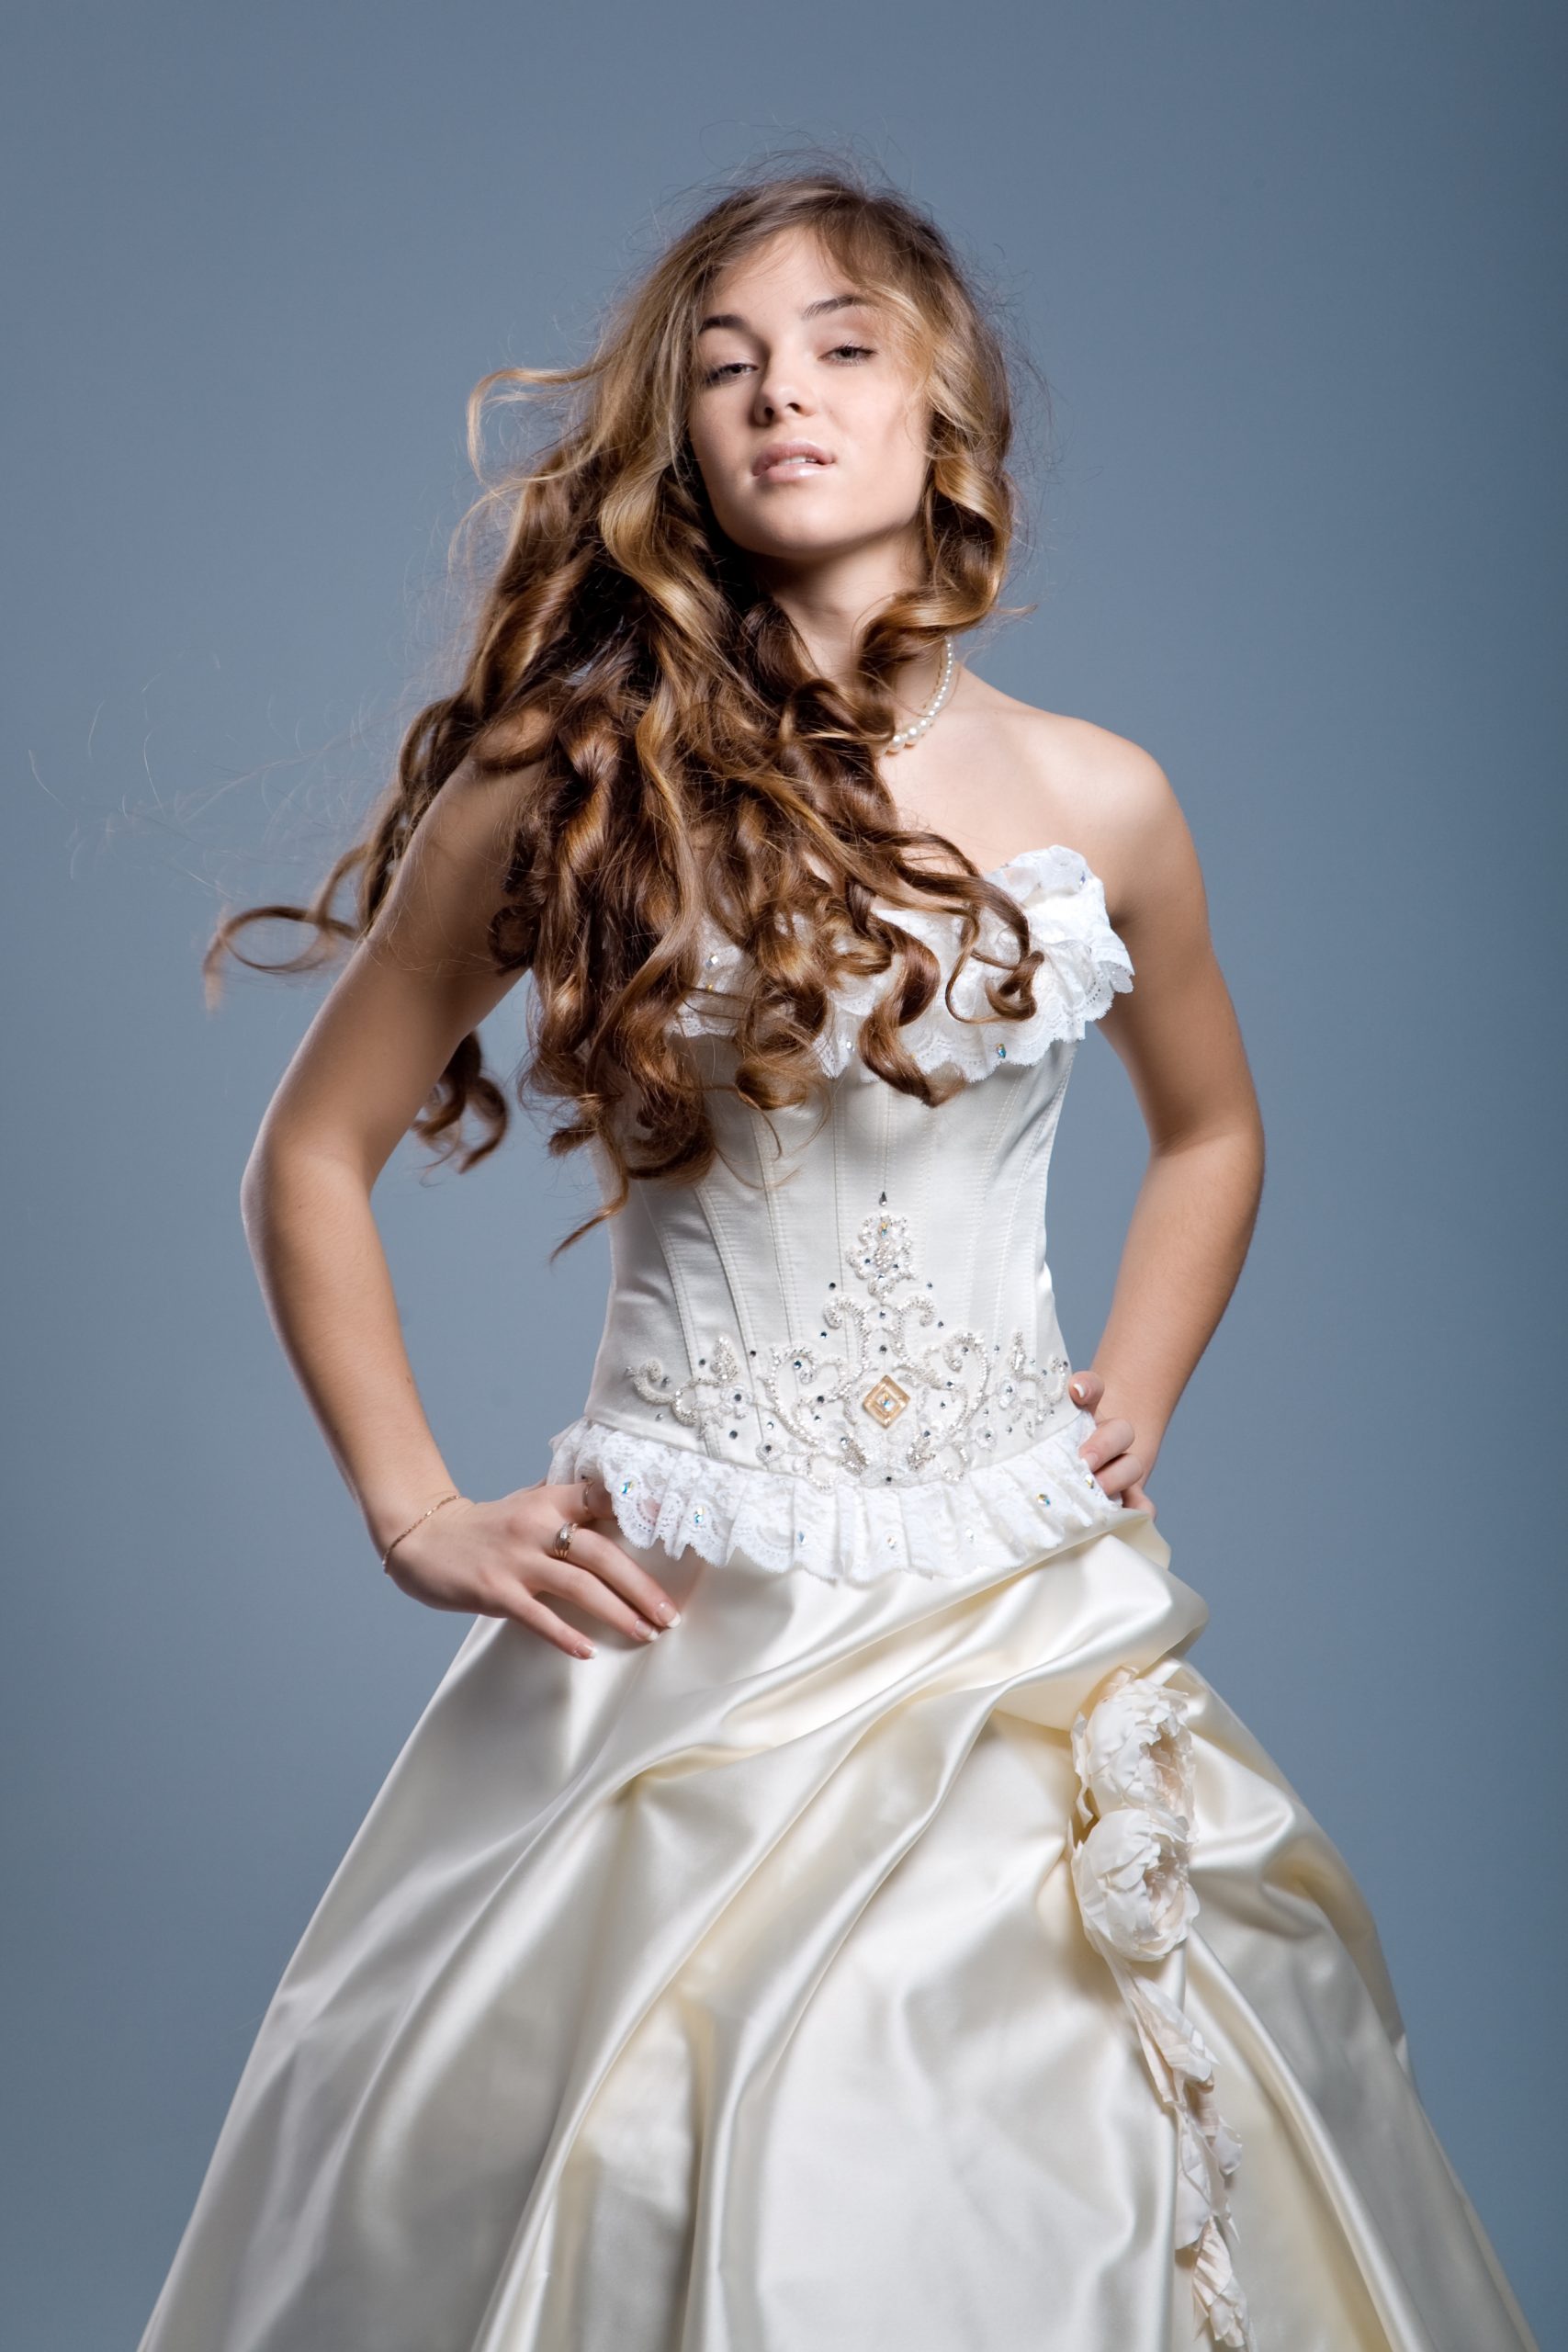 green-technology-wedding-dress-dry-cleaning